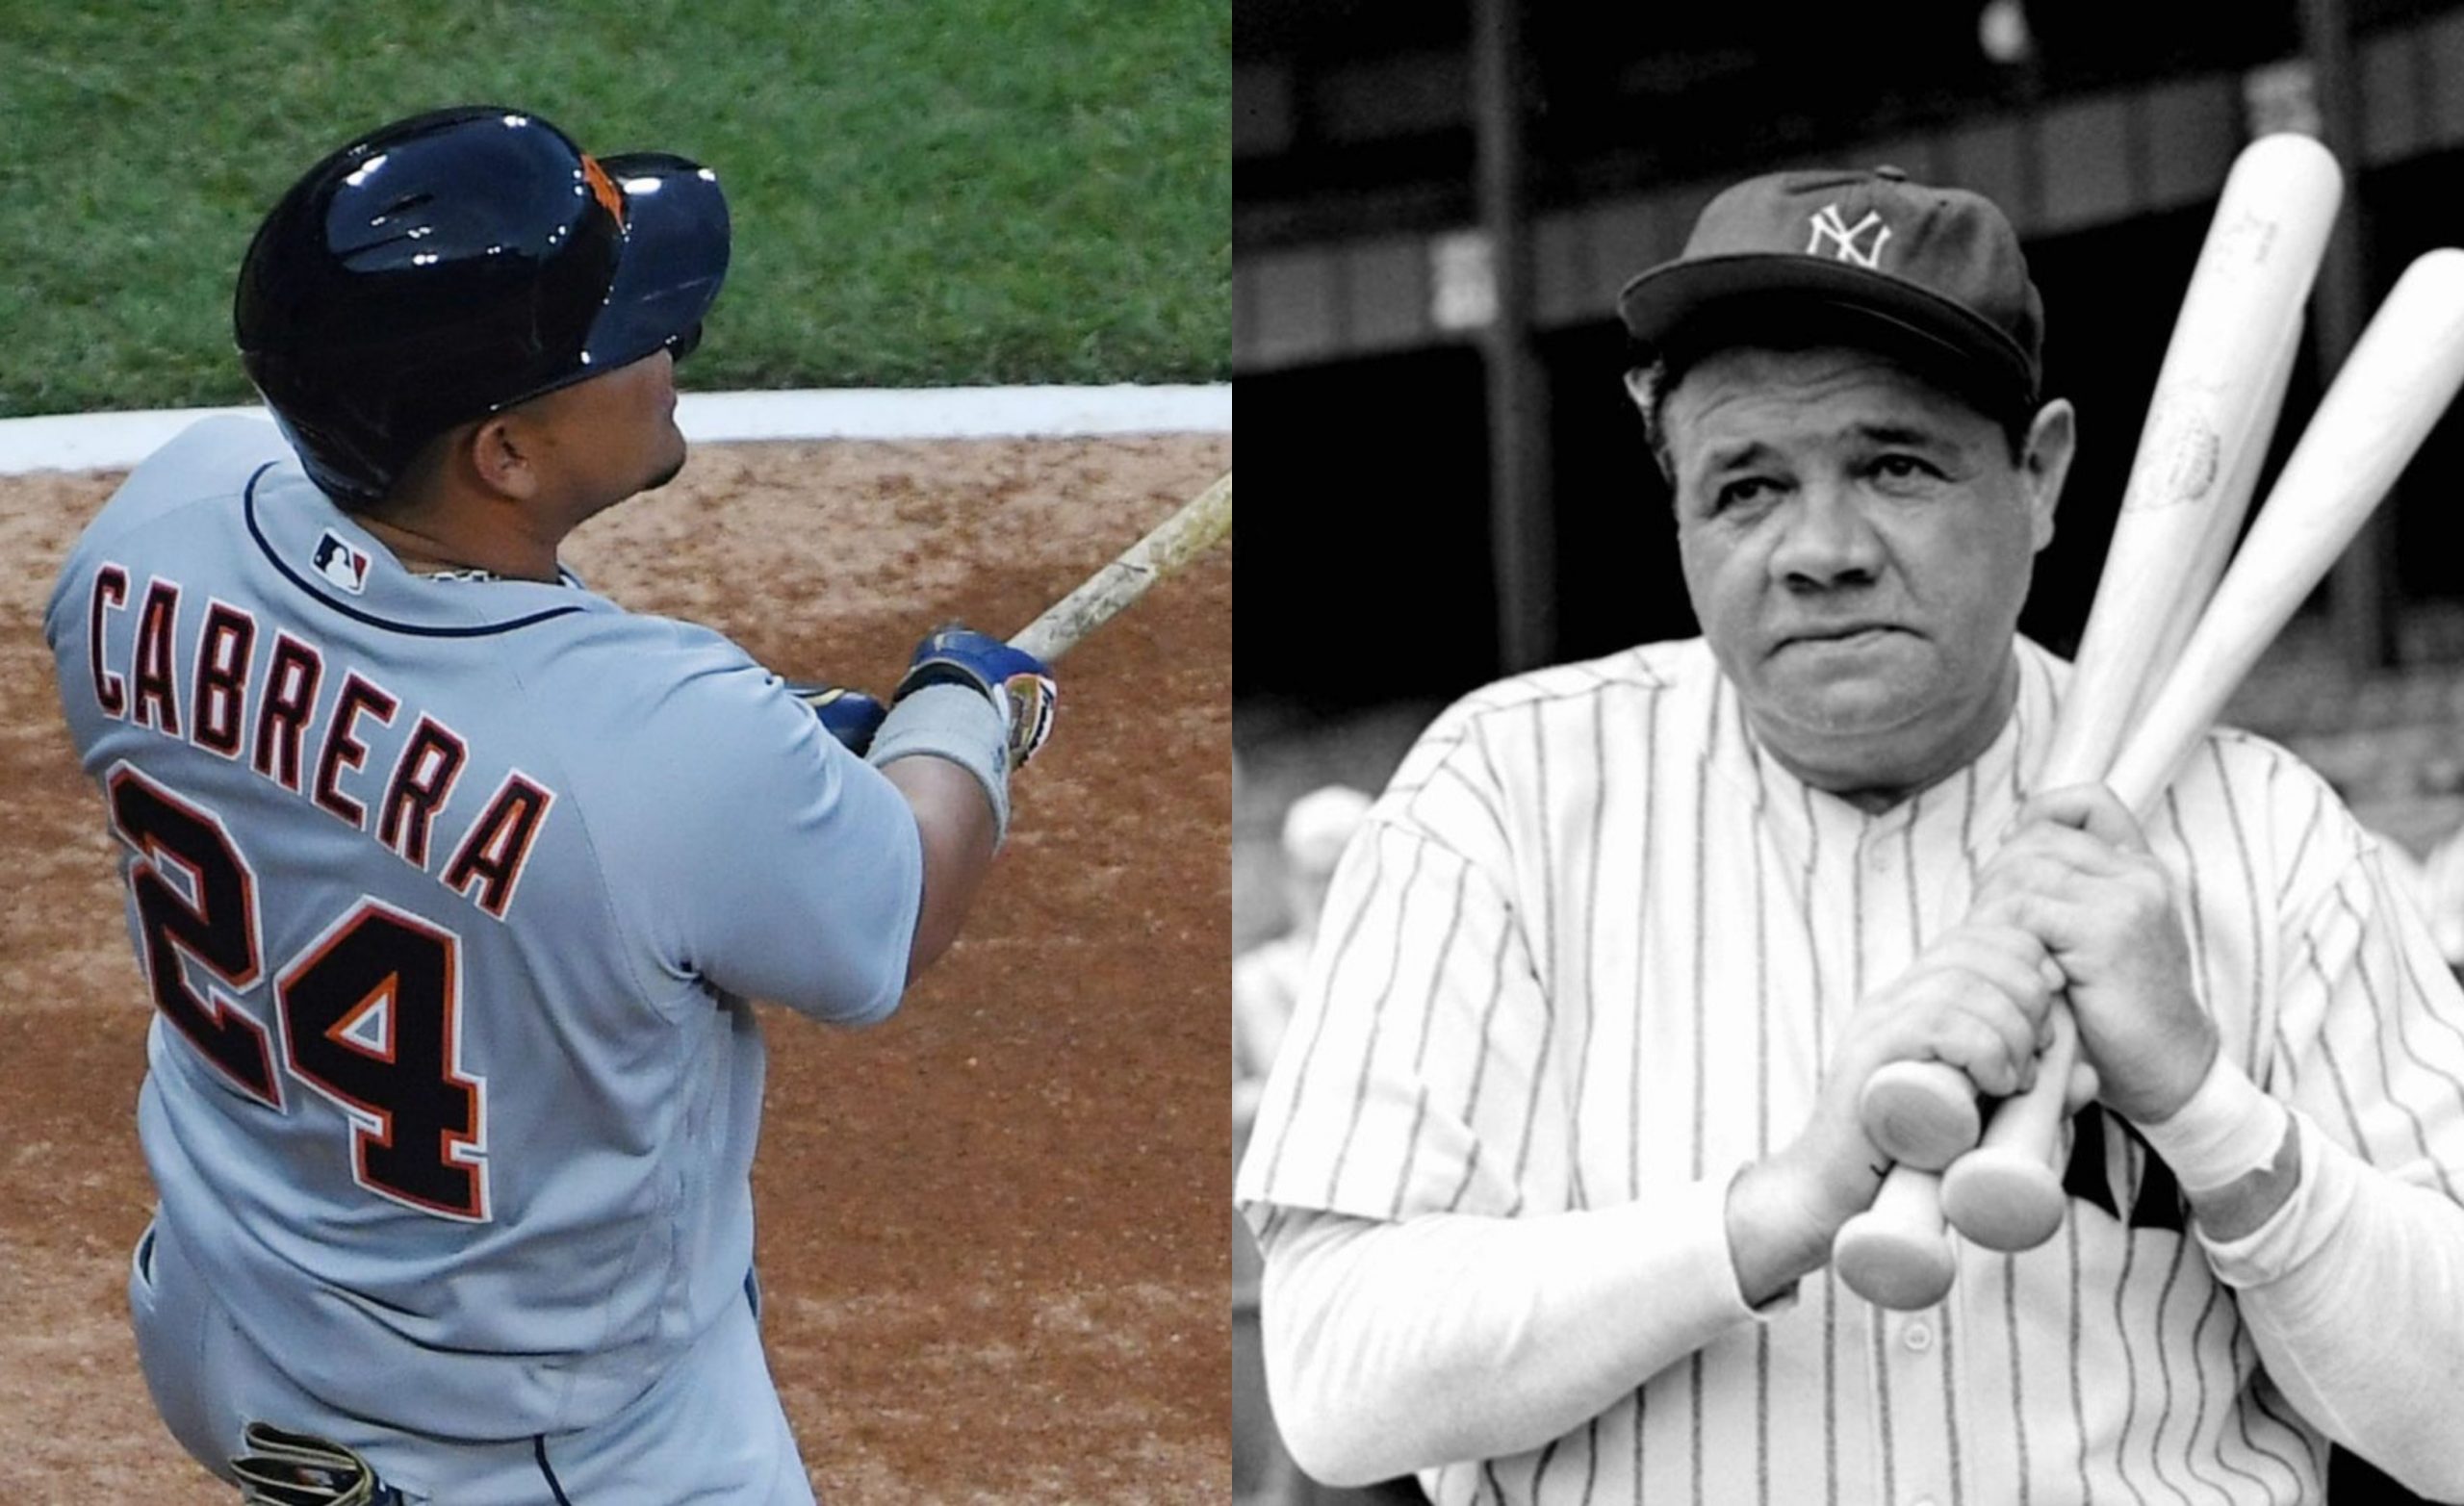 OF LEGEND: Miguel Cabrera equaled another Babe Ruth record in the Major Leagues (Video)